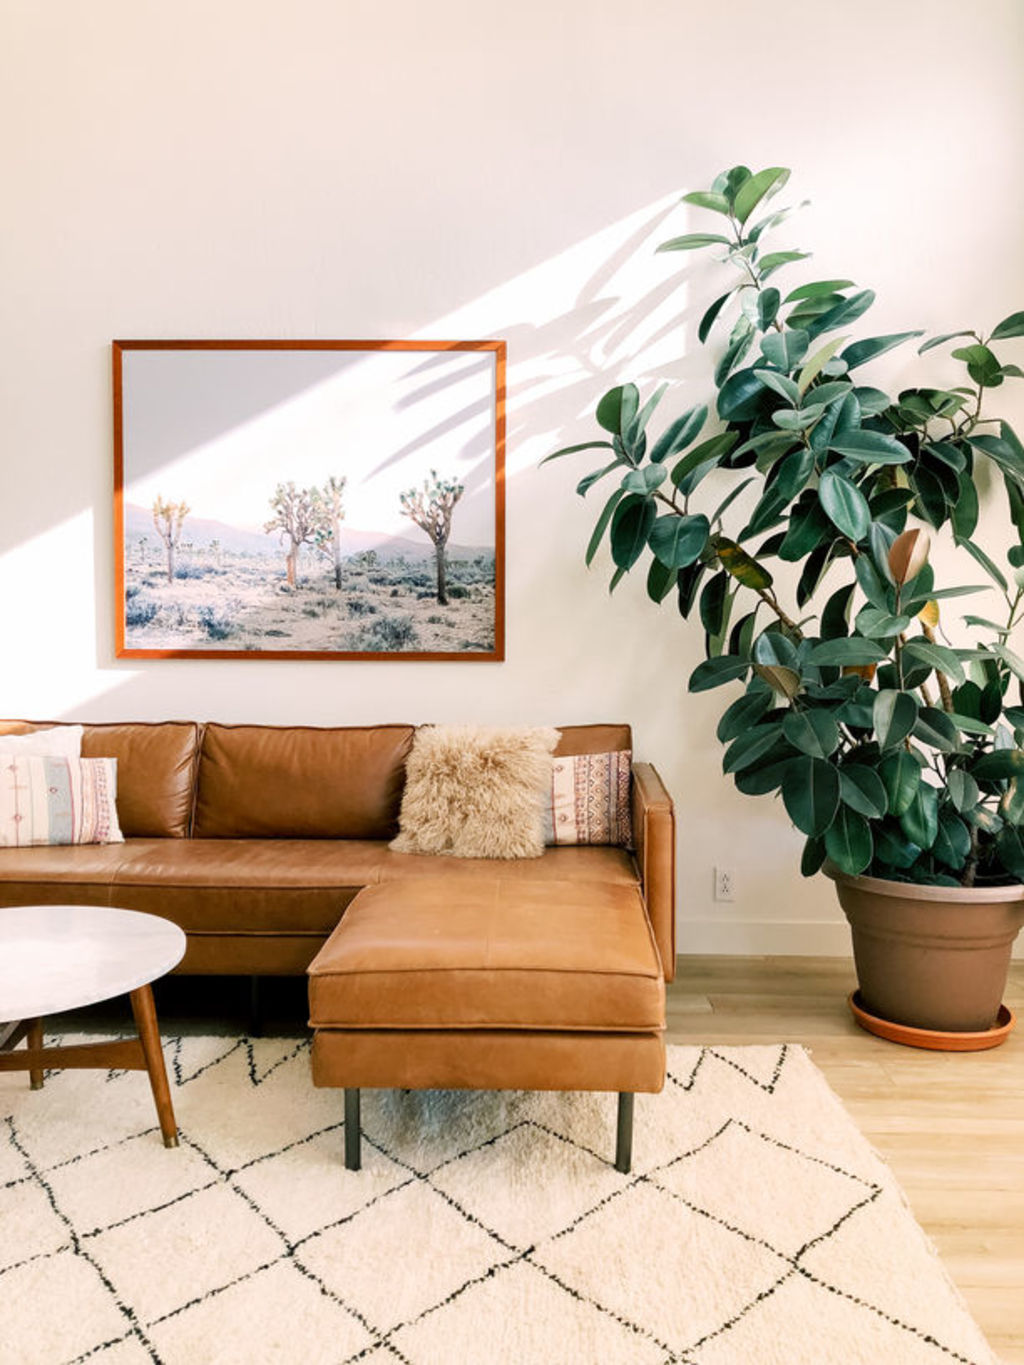 How to style your home for sale on a budget